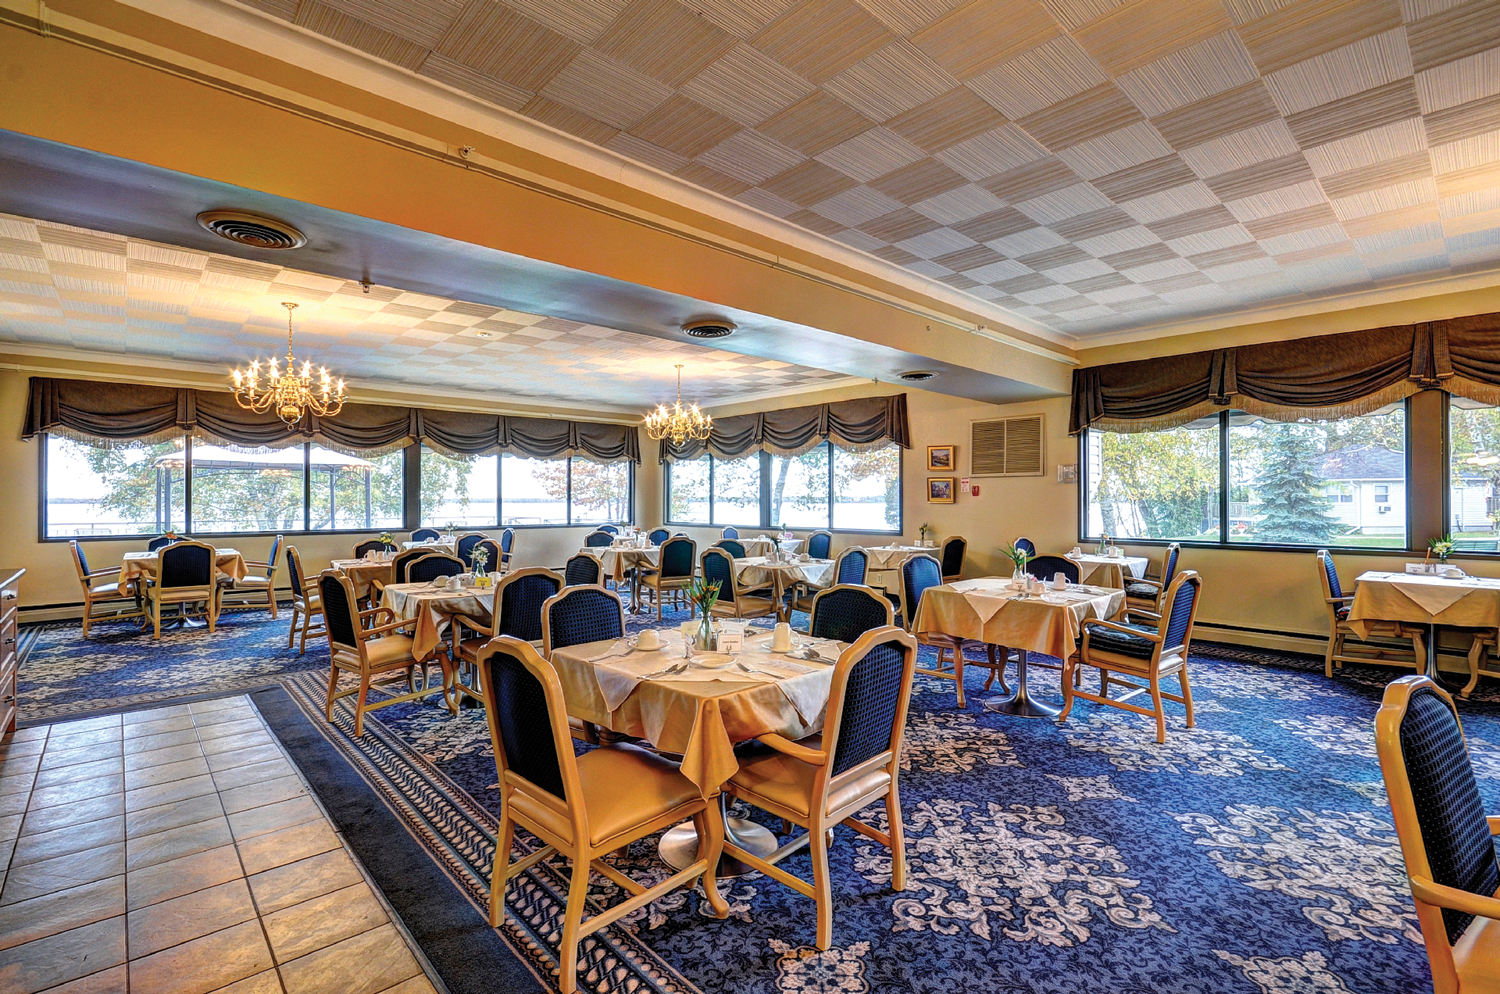 Birchmere Dining Room. Click to view larger image.